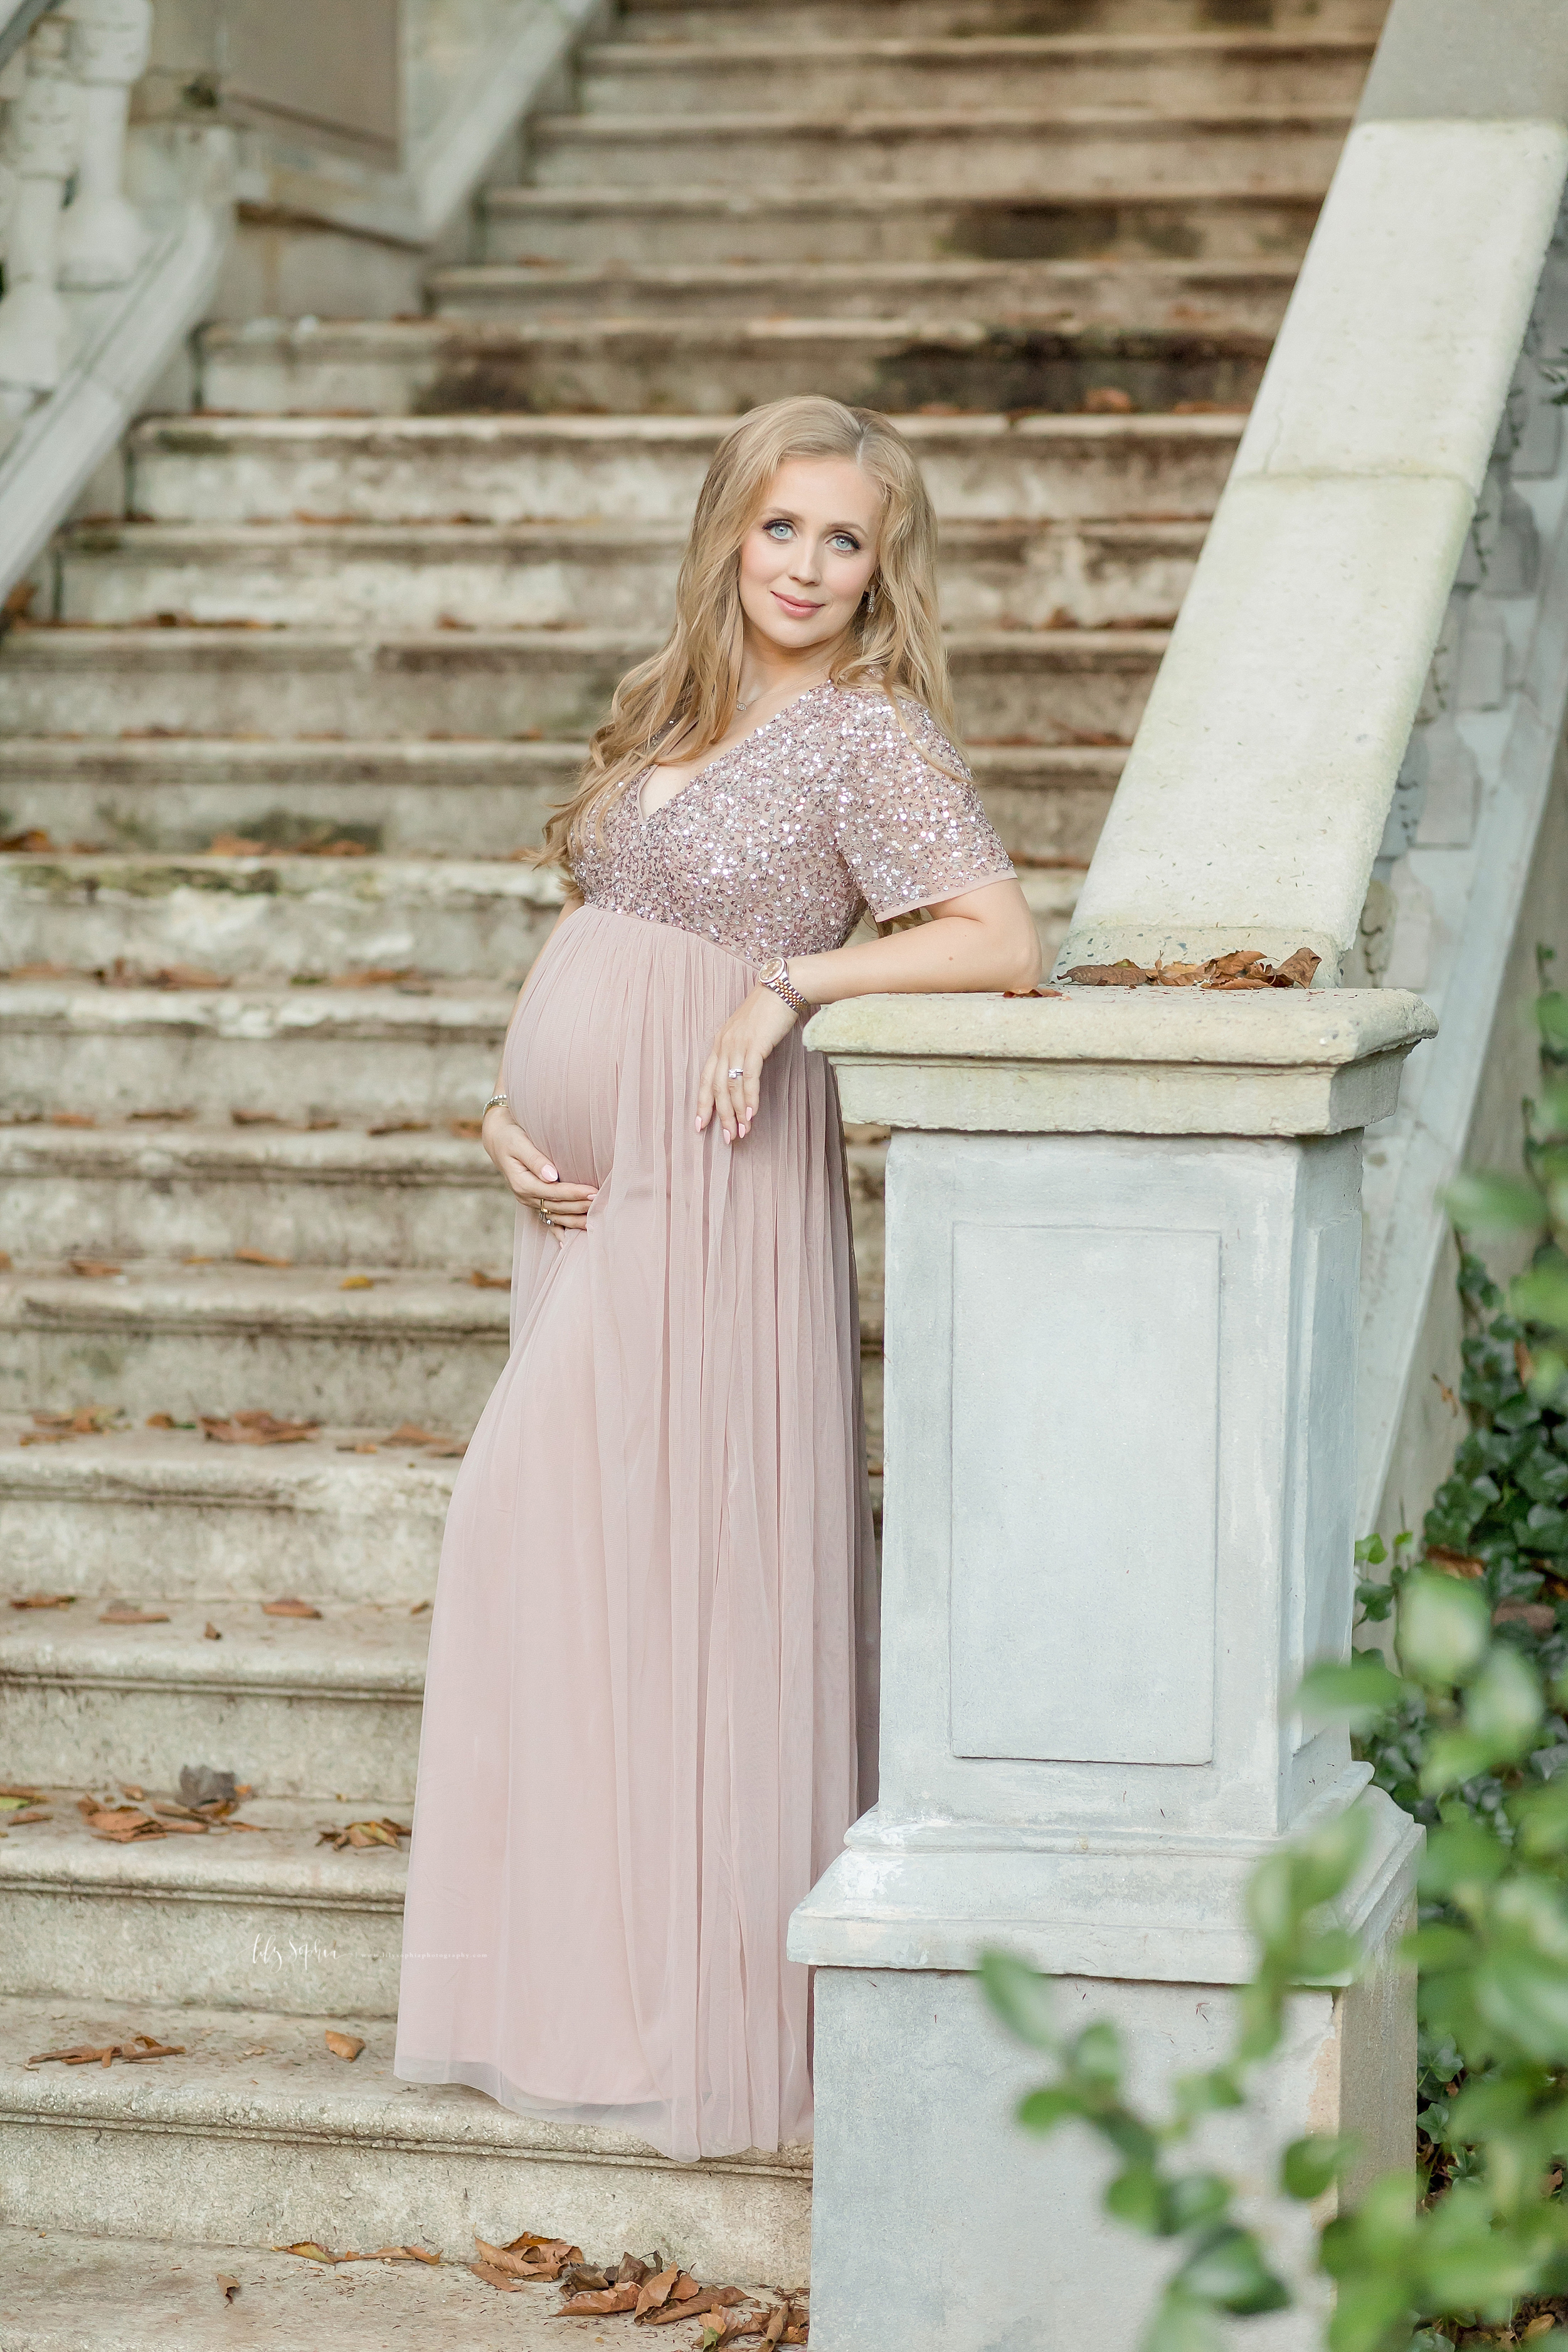 atlanta-buckhead-brookhaven-inman-decatur-lily-sophia-photography-maternity-pregnancy-photographer-portraits-studio-grant-park-intown-couple-russian-expecting-baby-boy-outdoors-gardens-sunset-fall_0665.jpg